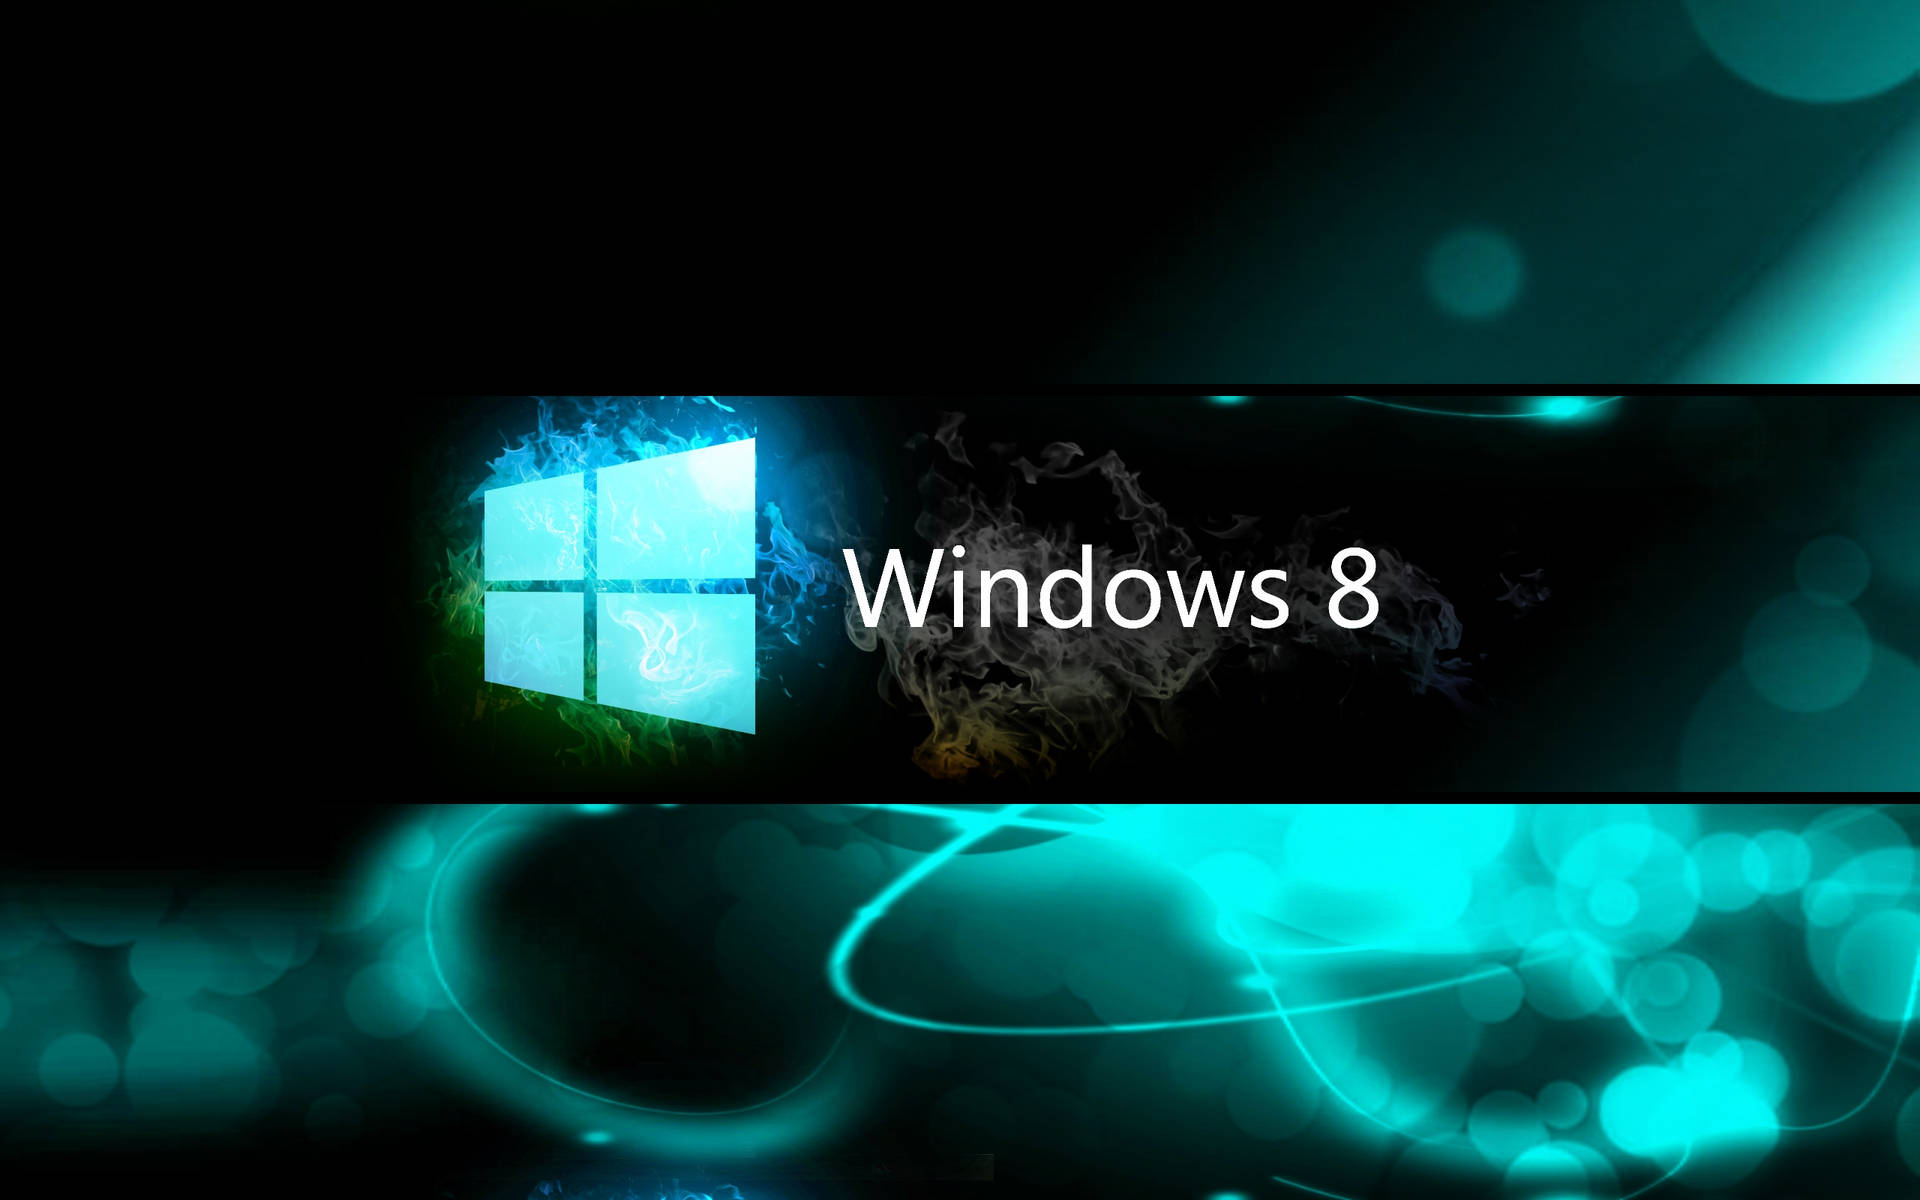 Windows 8 Abstract Teal Graphic Background